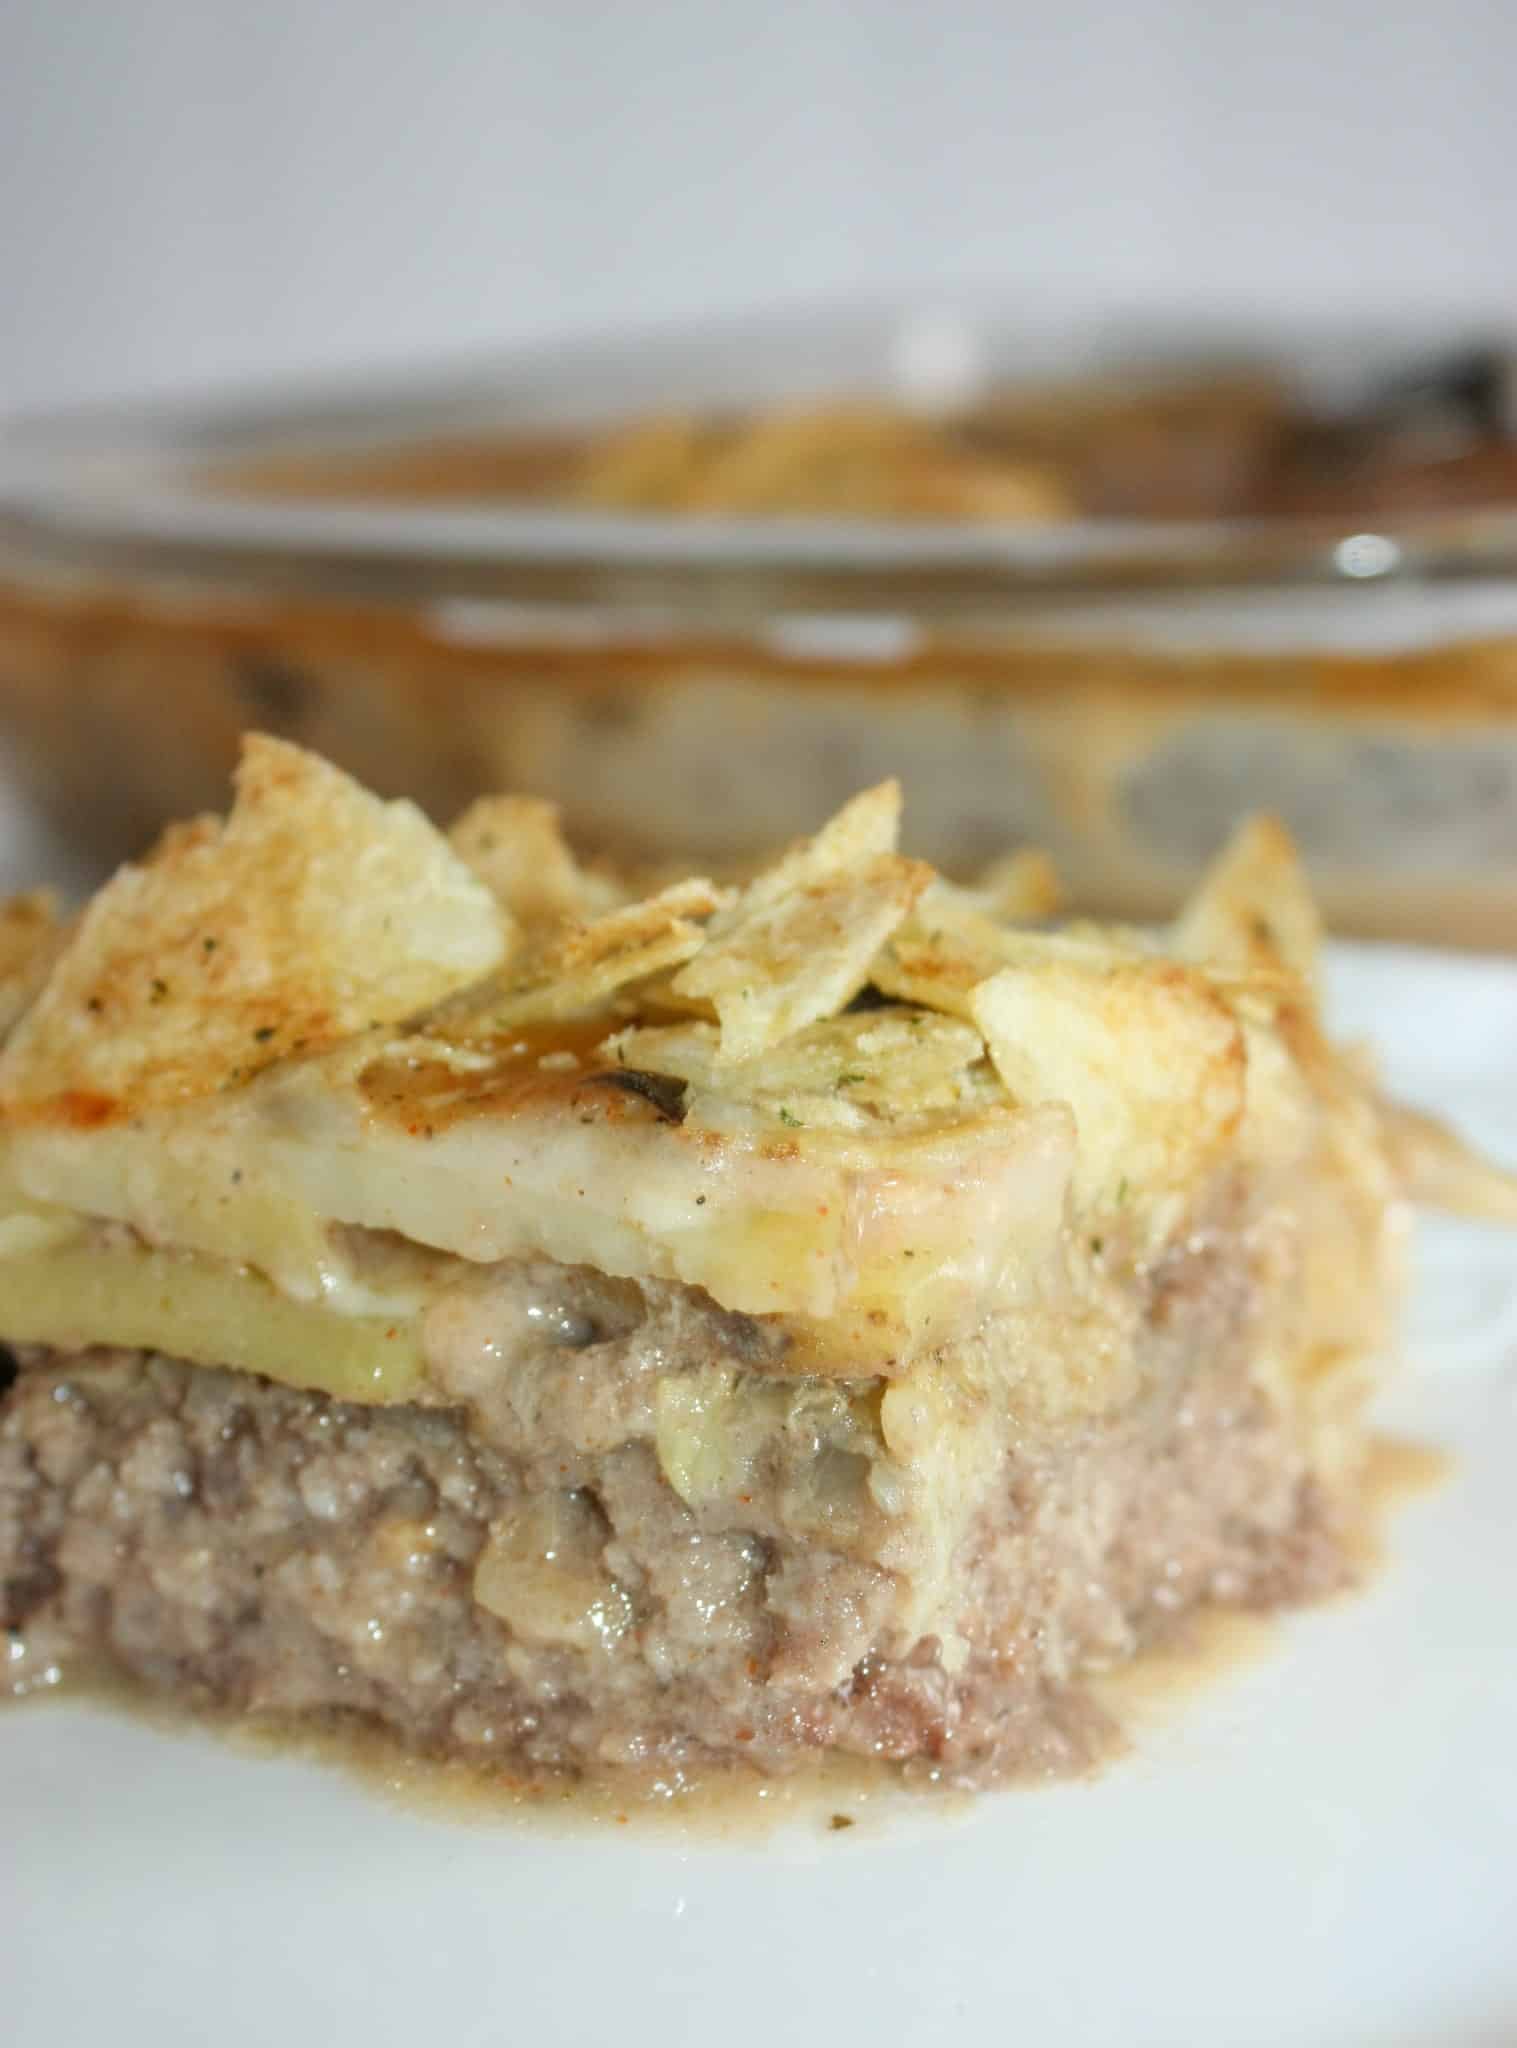 Hobo Casserole is a layered dinner recipe that is loaded with potatoes,beef and potato chips.  The gluten free sauce not only adds moisture but flavour as well.